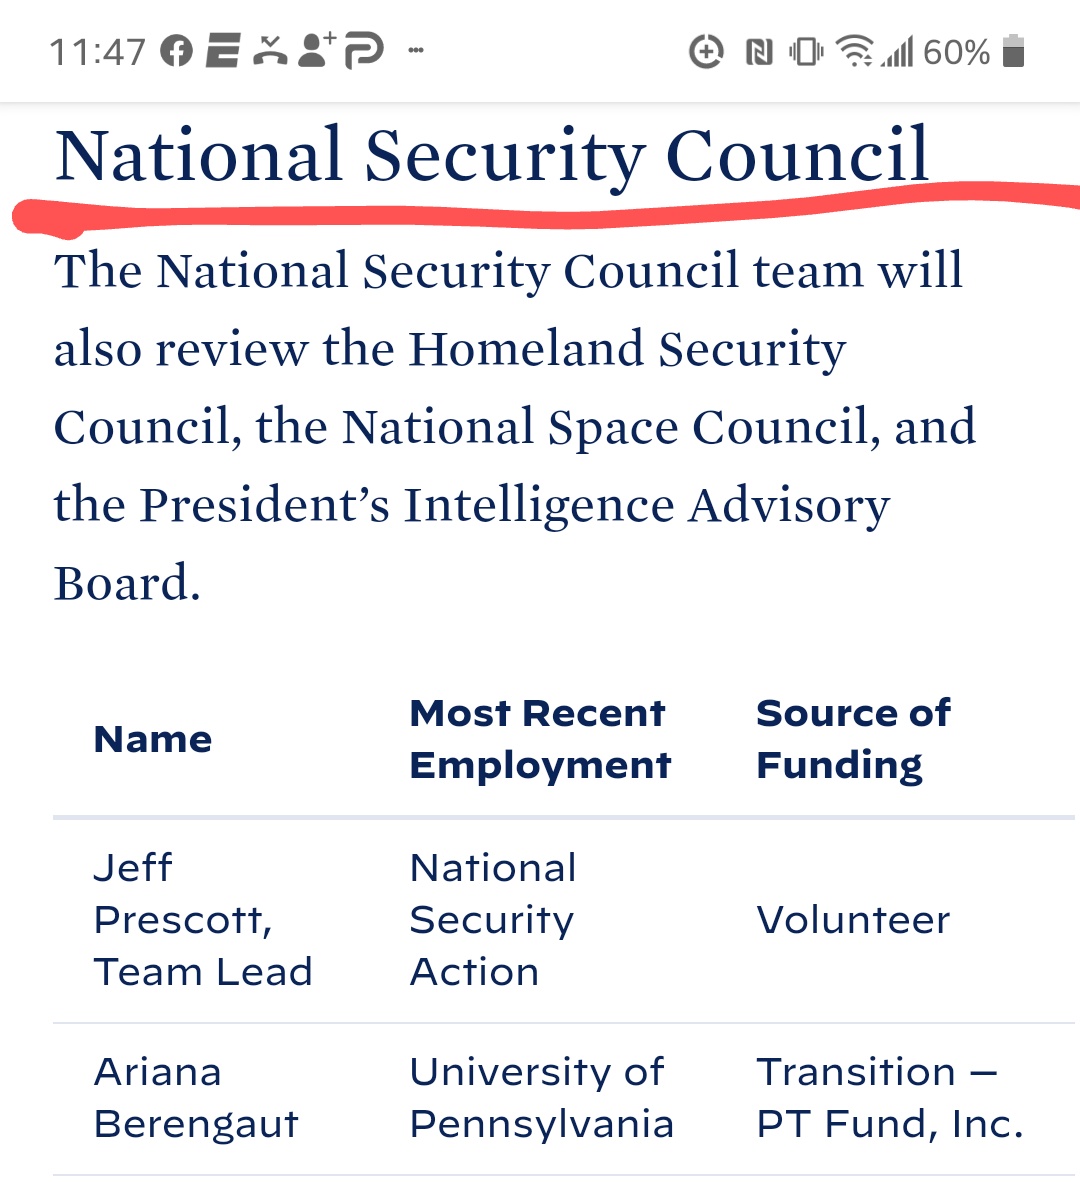 ~32~Interesting... Sequoia established a Chinese affiliate to their US firm. I only see 1 individual on Biden's transition team, "Michael Ortiz" for the National Security Council. While looking at the executives from Sequoia I see Michael Mortiz. Coincidence? I doubt it!